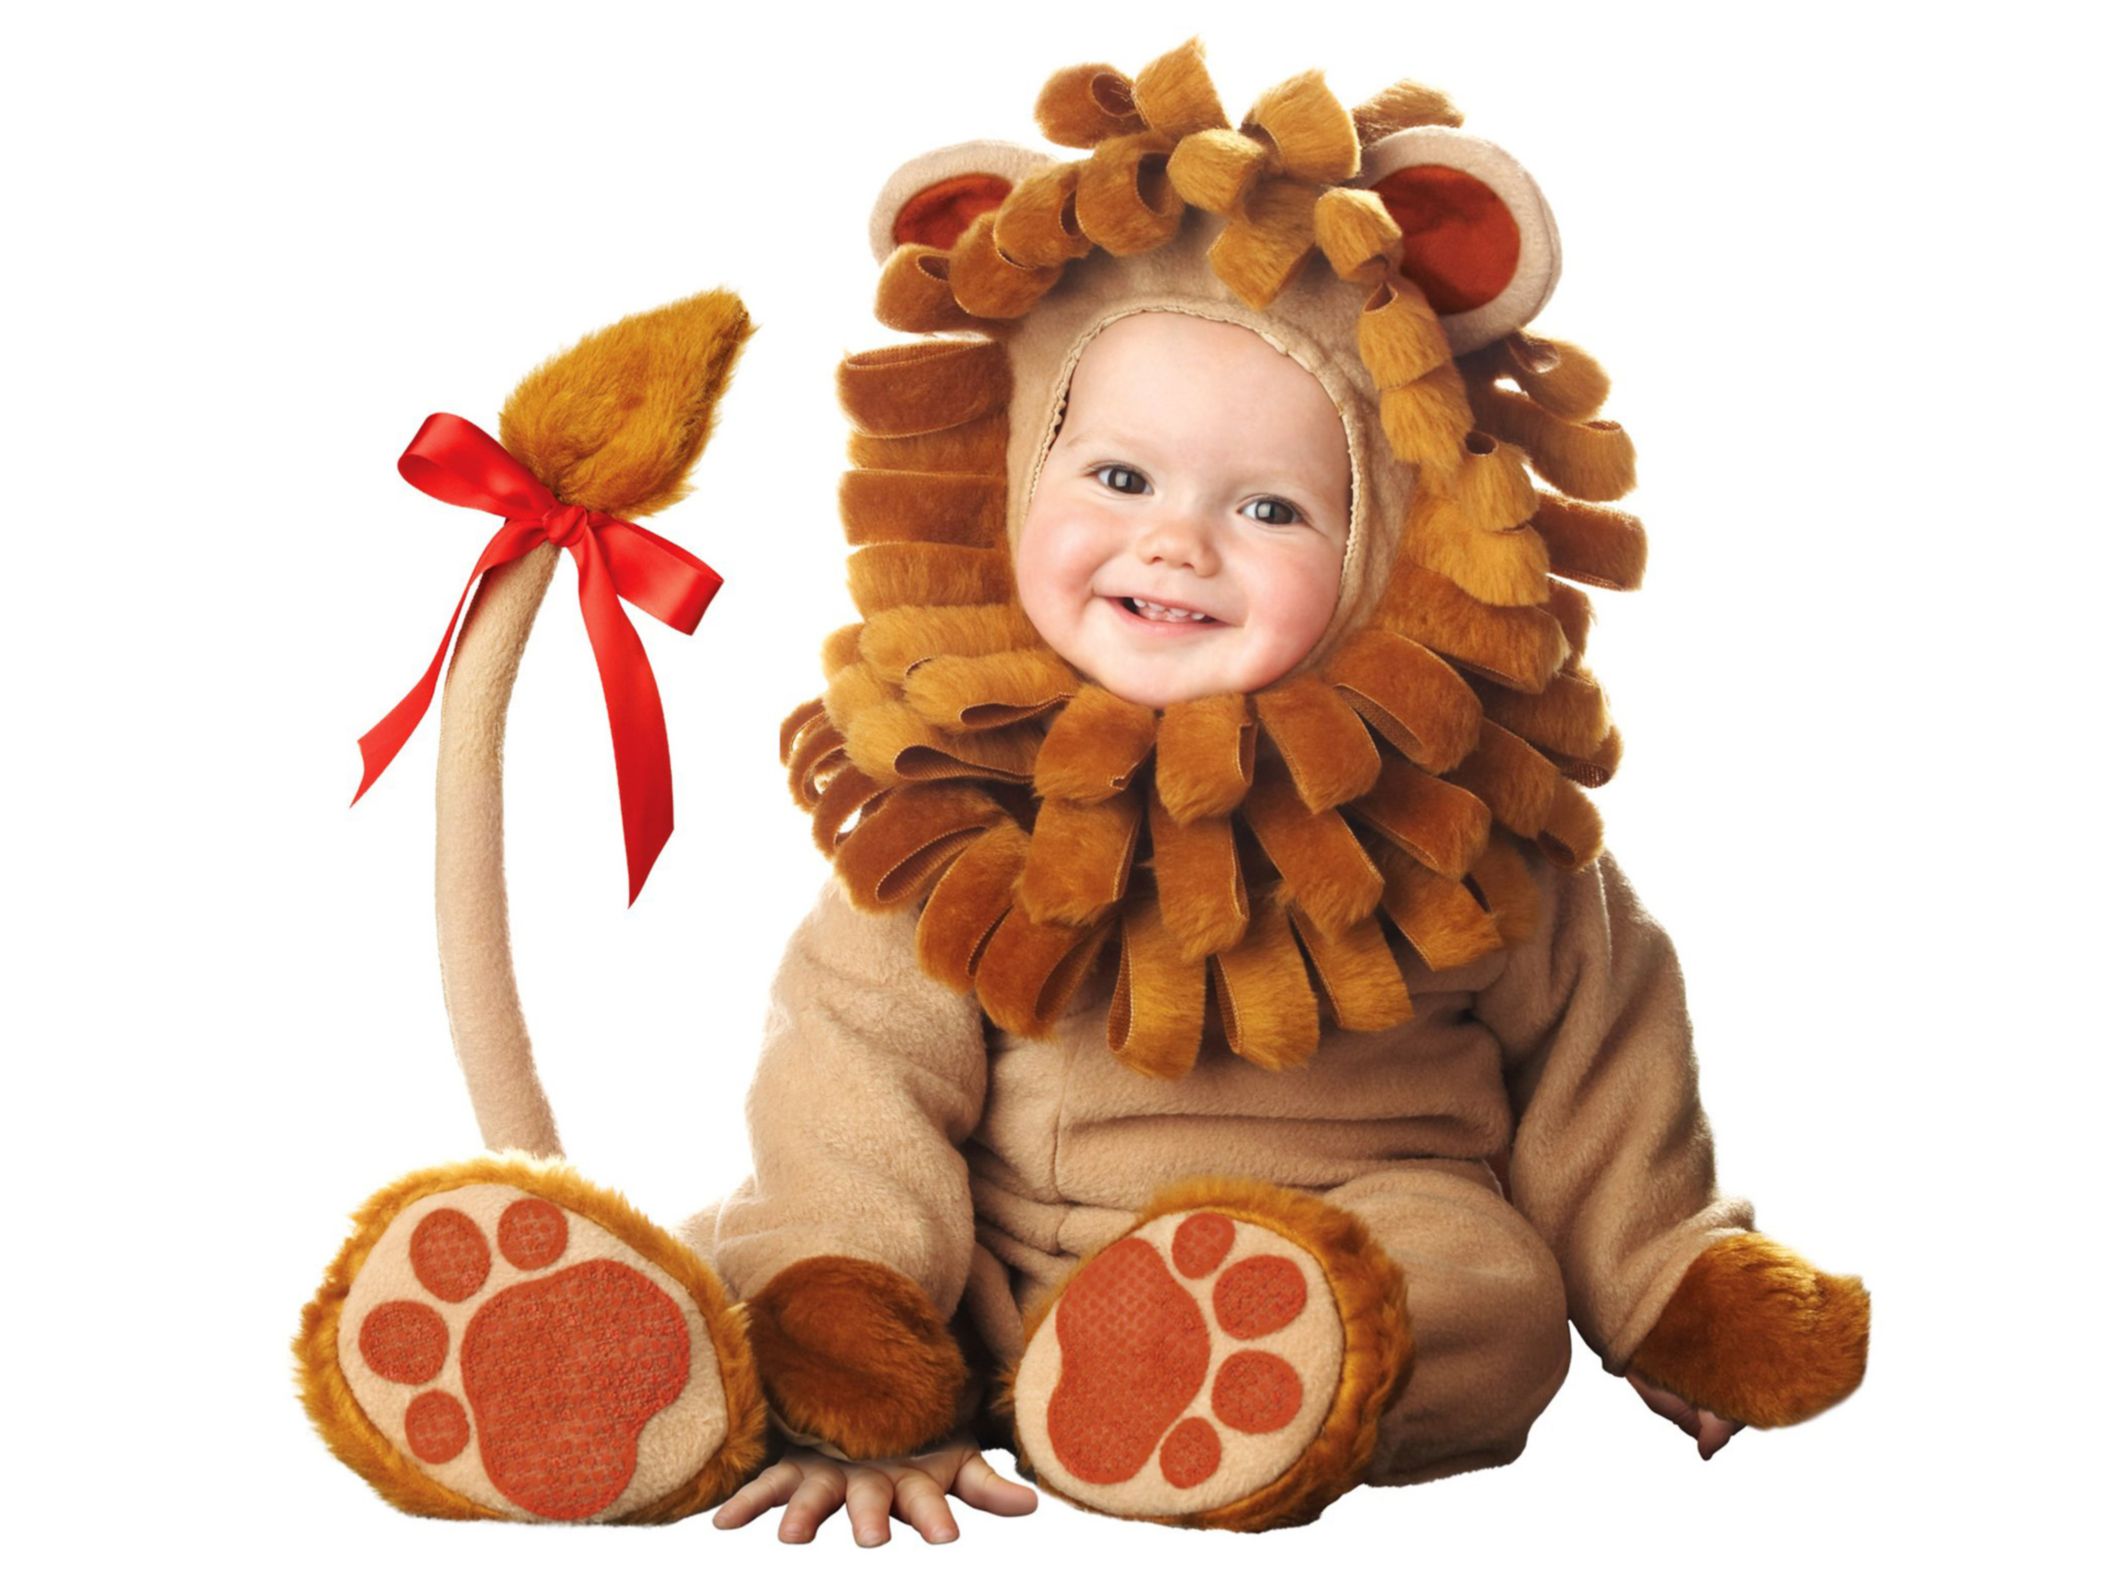 photography, baby, child, costume, cute, smile